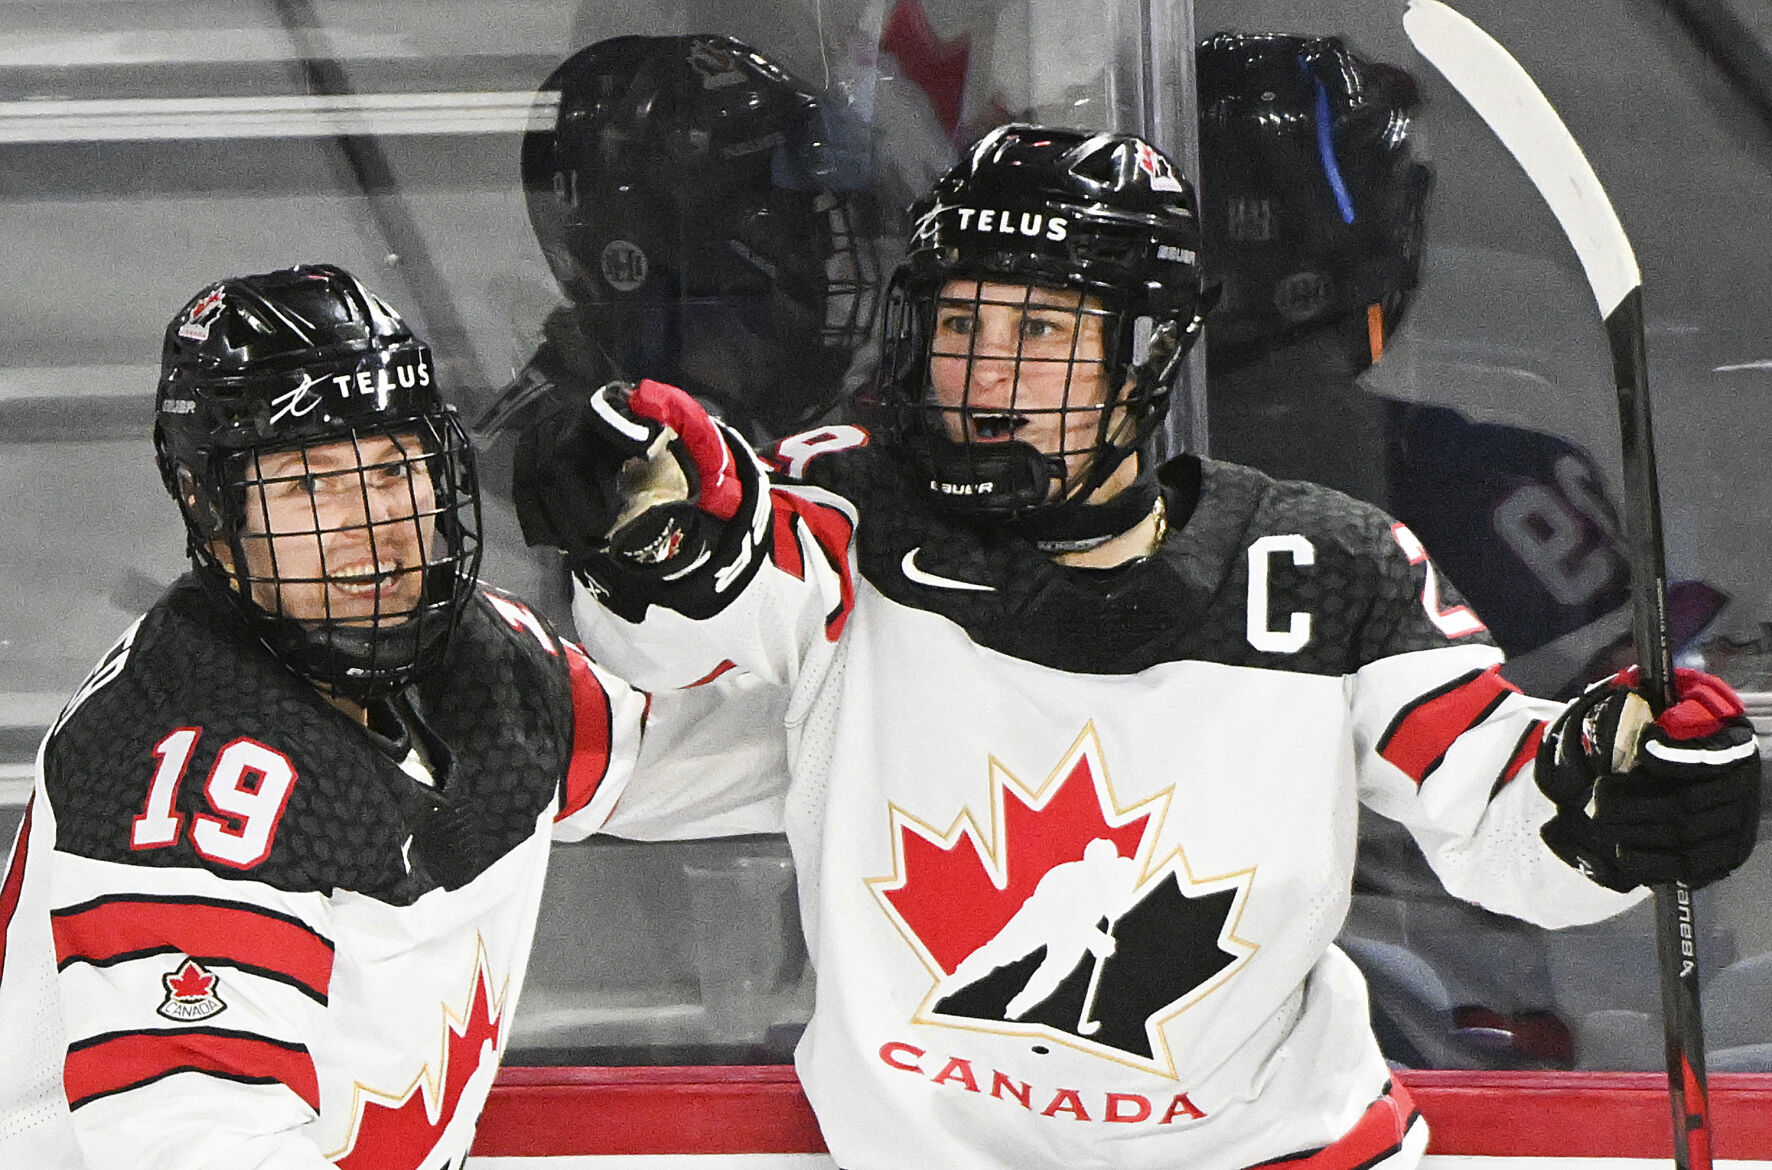 Catching Canada is the challenge at womens hockey worlds